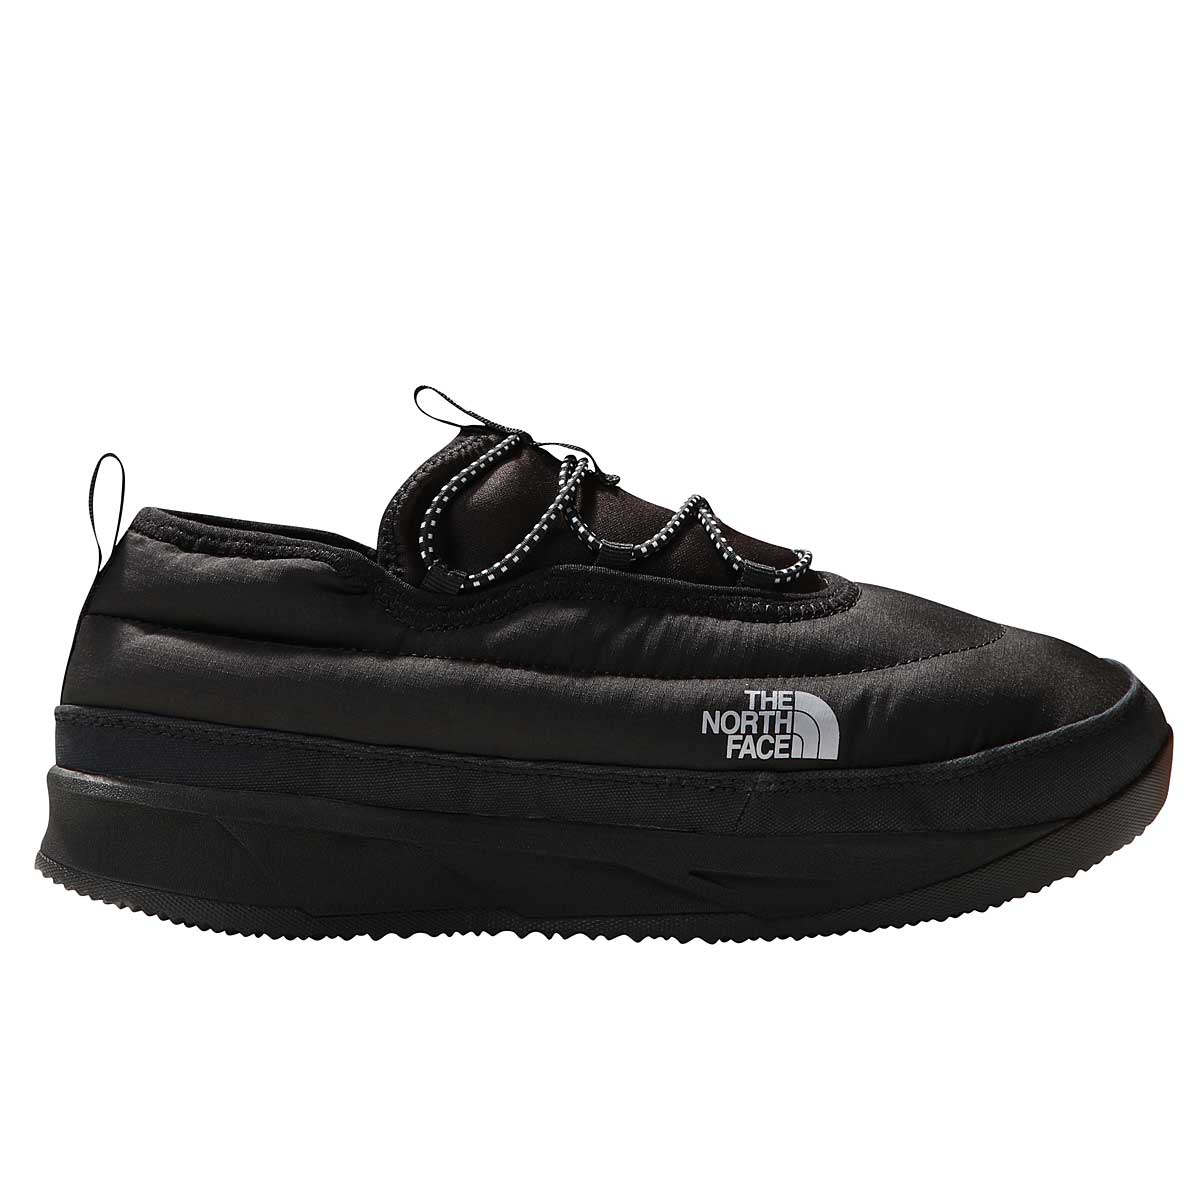 The North Face Nse Low, Tnf Black/Tnf Black